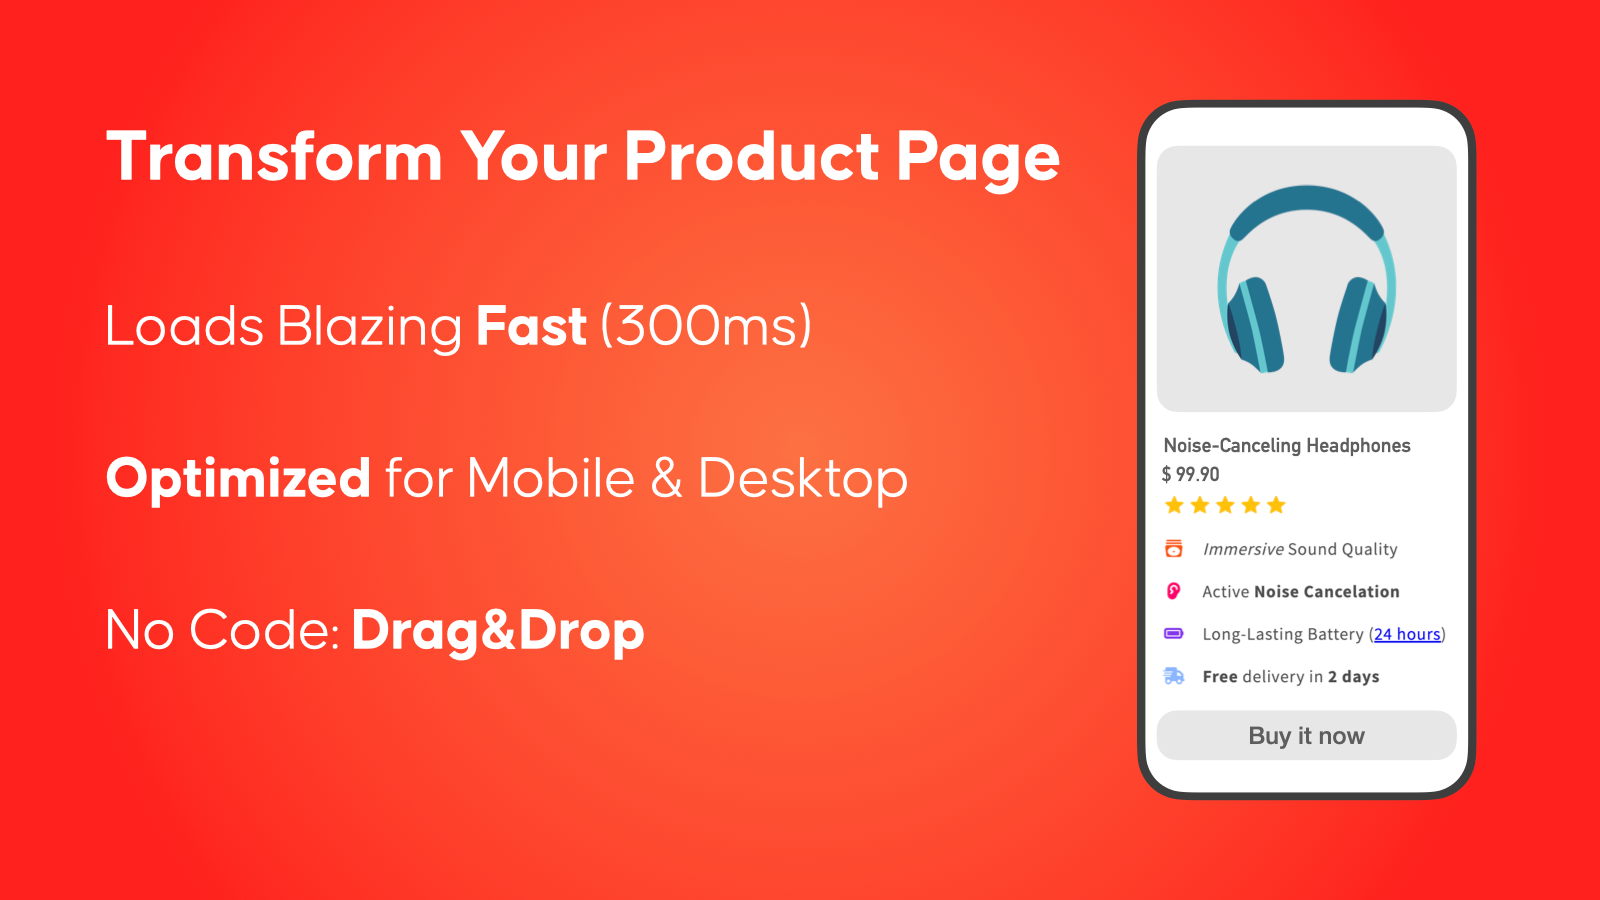 Transform your Productpage